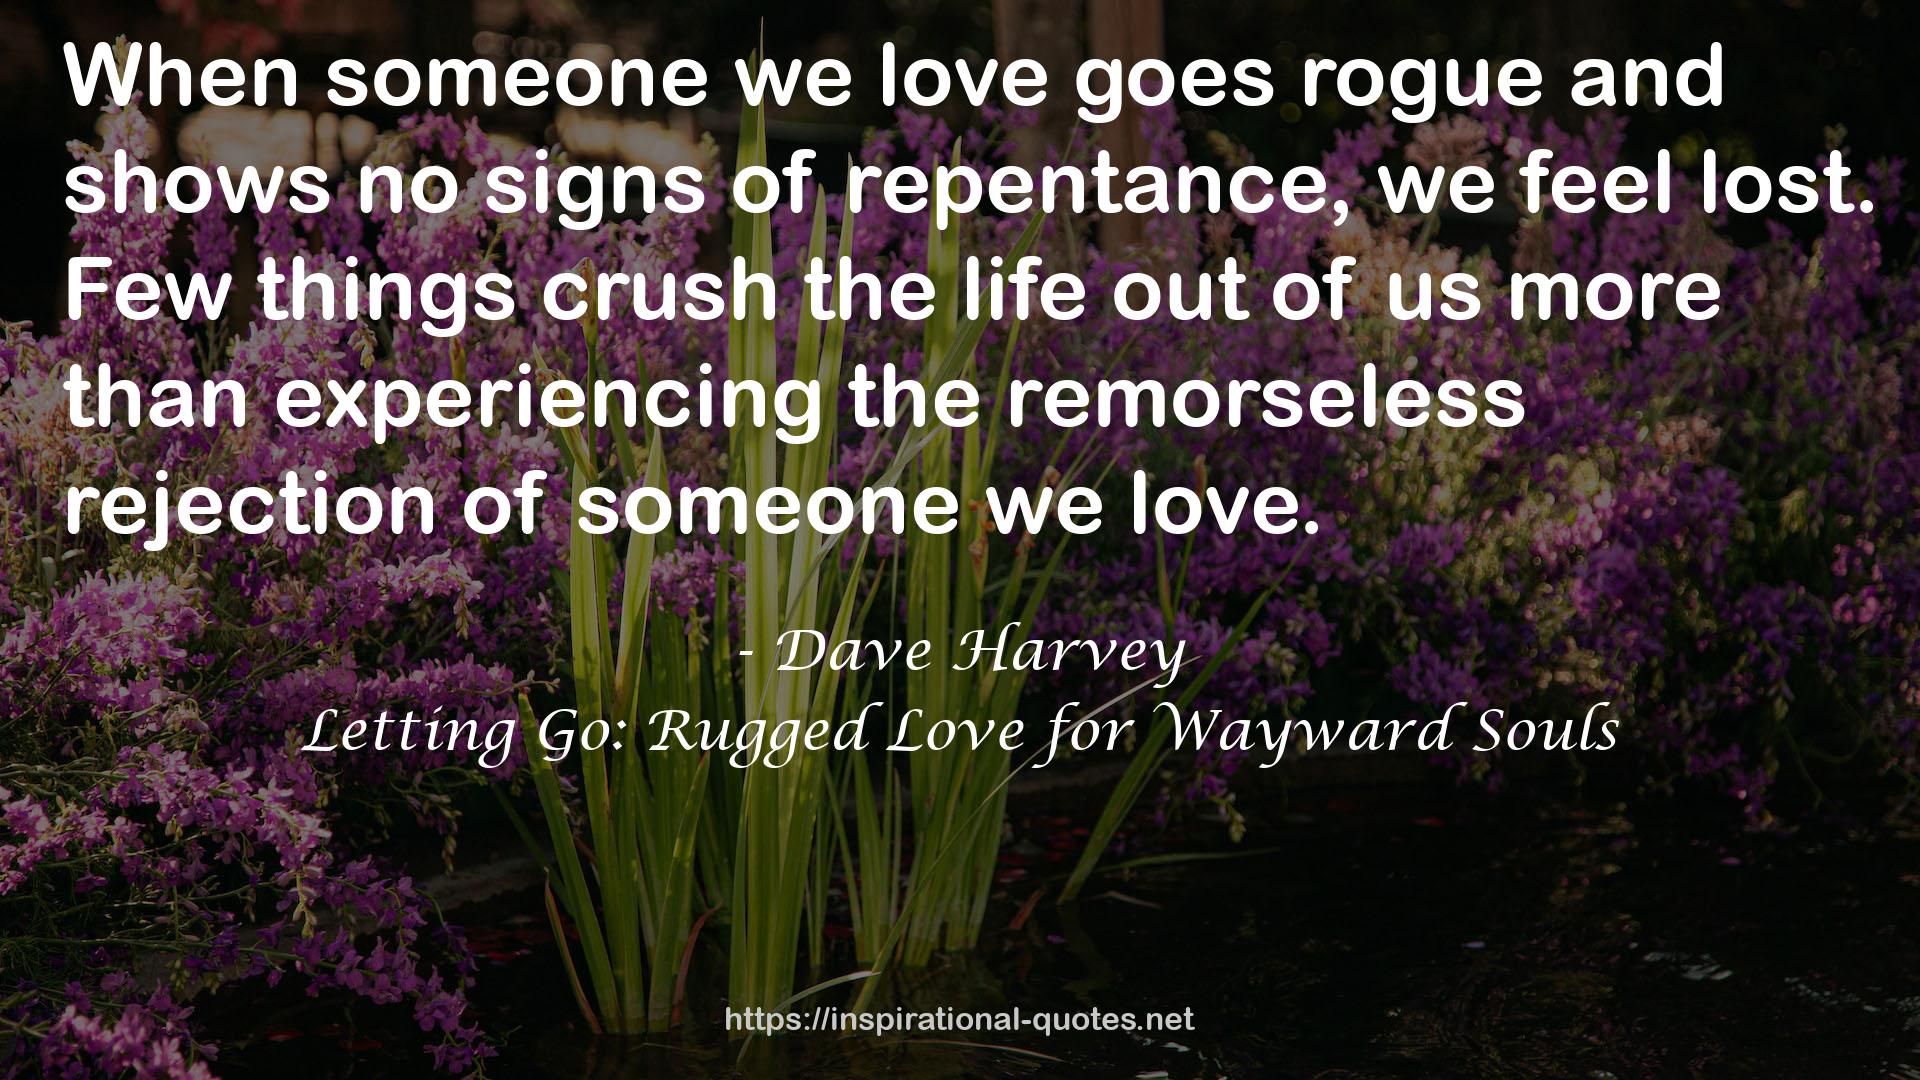 Letting Go: Rugged Love for Wayward Souls QUOTES